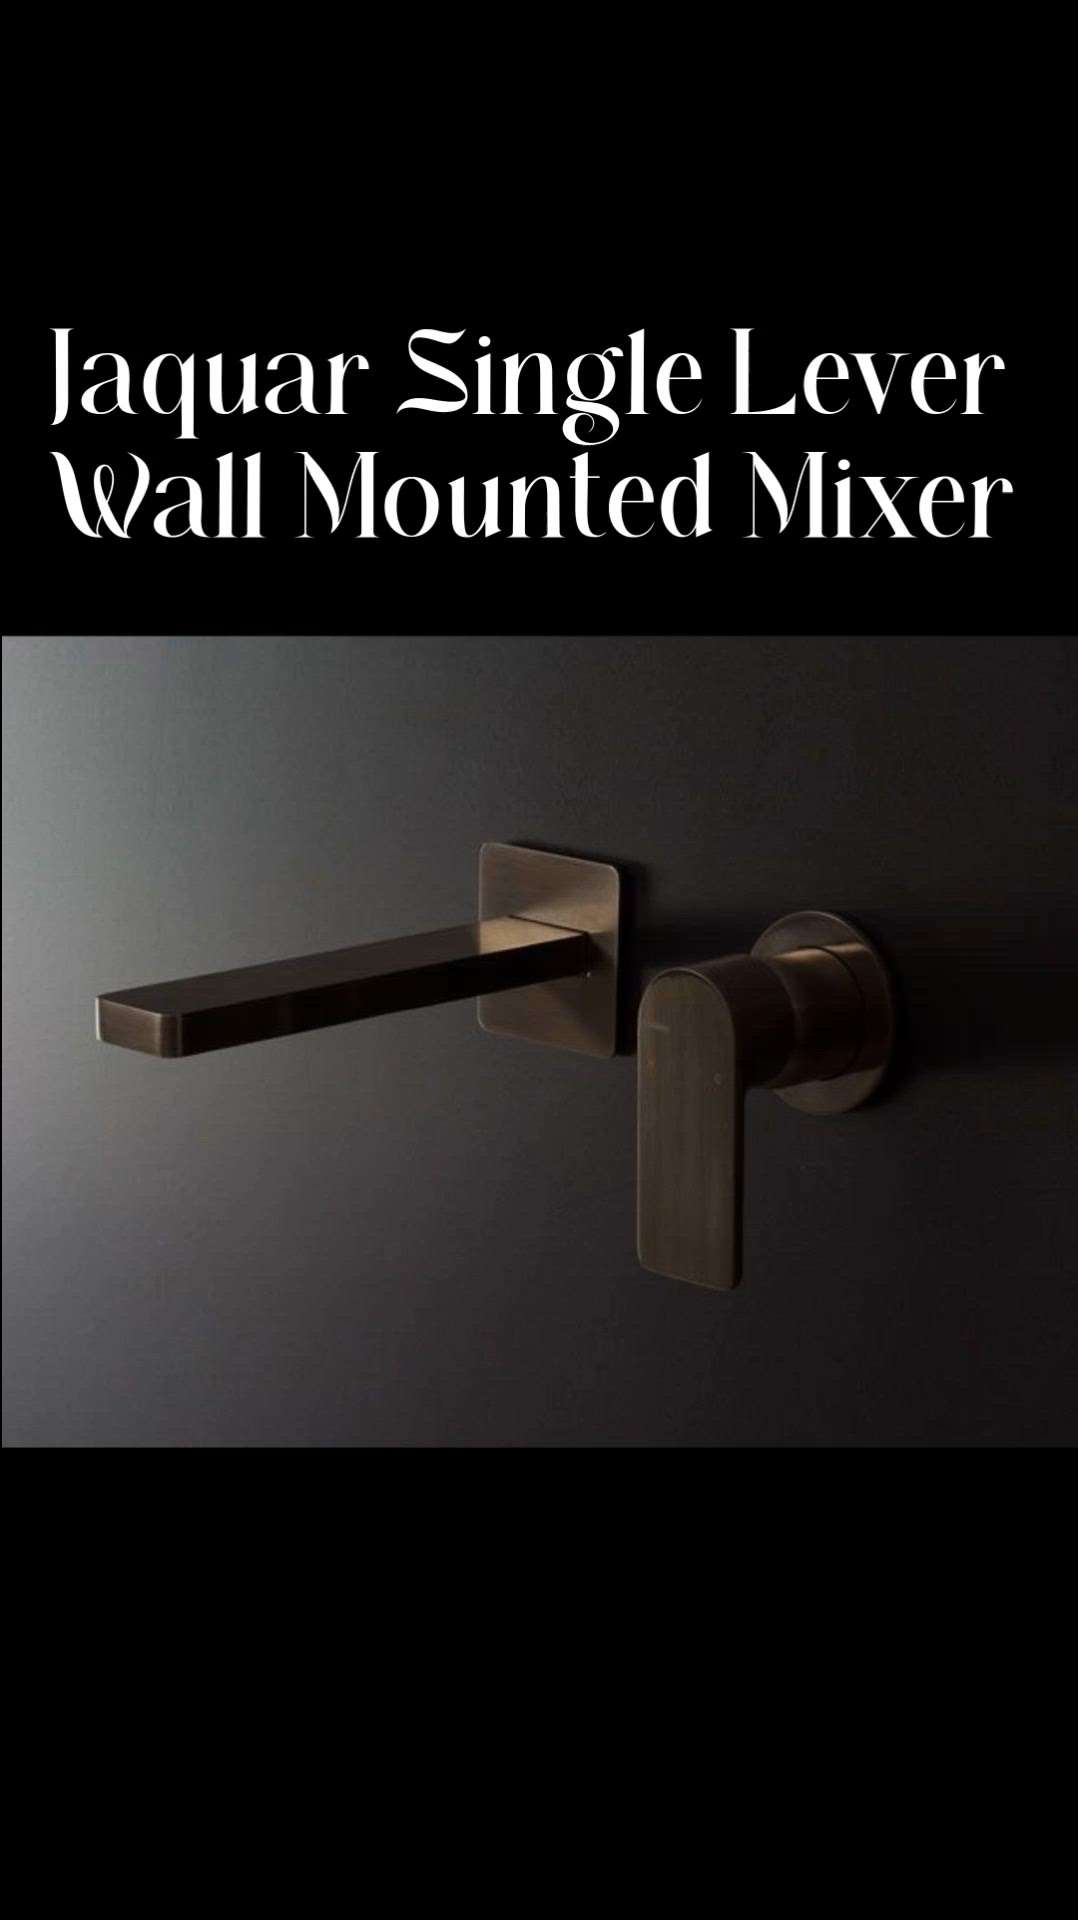 JAQUAR SINGLE LEVER CONCEALED WALL MOUNT BASIN MIXER
SERIES: ARIA
FINISH: CHROME
PRODUCT INFO : 
Exposed Part Kit of Single Lever Basin Mixer Wall Mounted Consisting of Operating Lever, Cartridge Sleeve, Wall Flange, Nipple & Spout.

 #jaquar #concealedmixer #basinmixer #wallmount #sanitaryshopping  #singlelever #exposedpartkit #kolo #bestprice